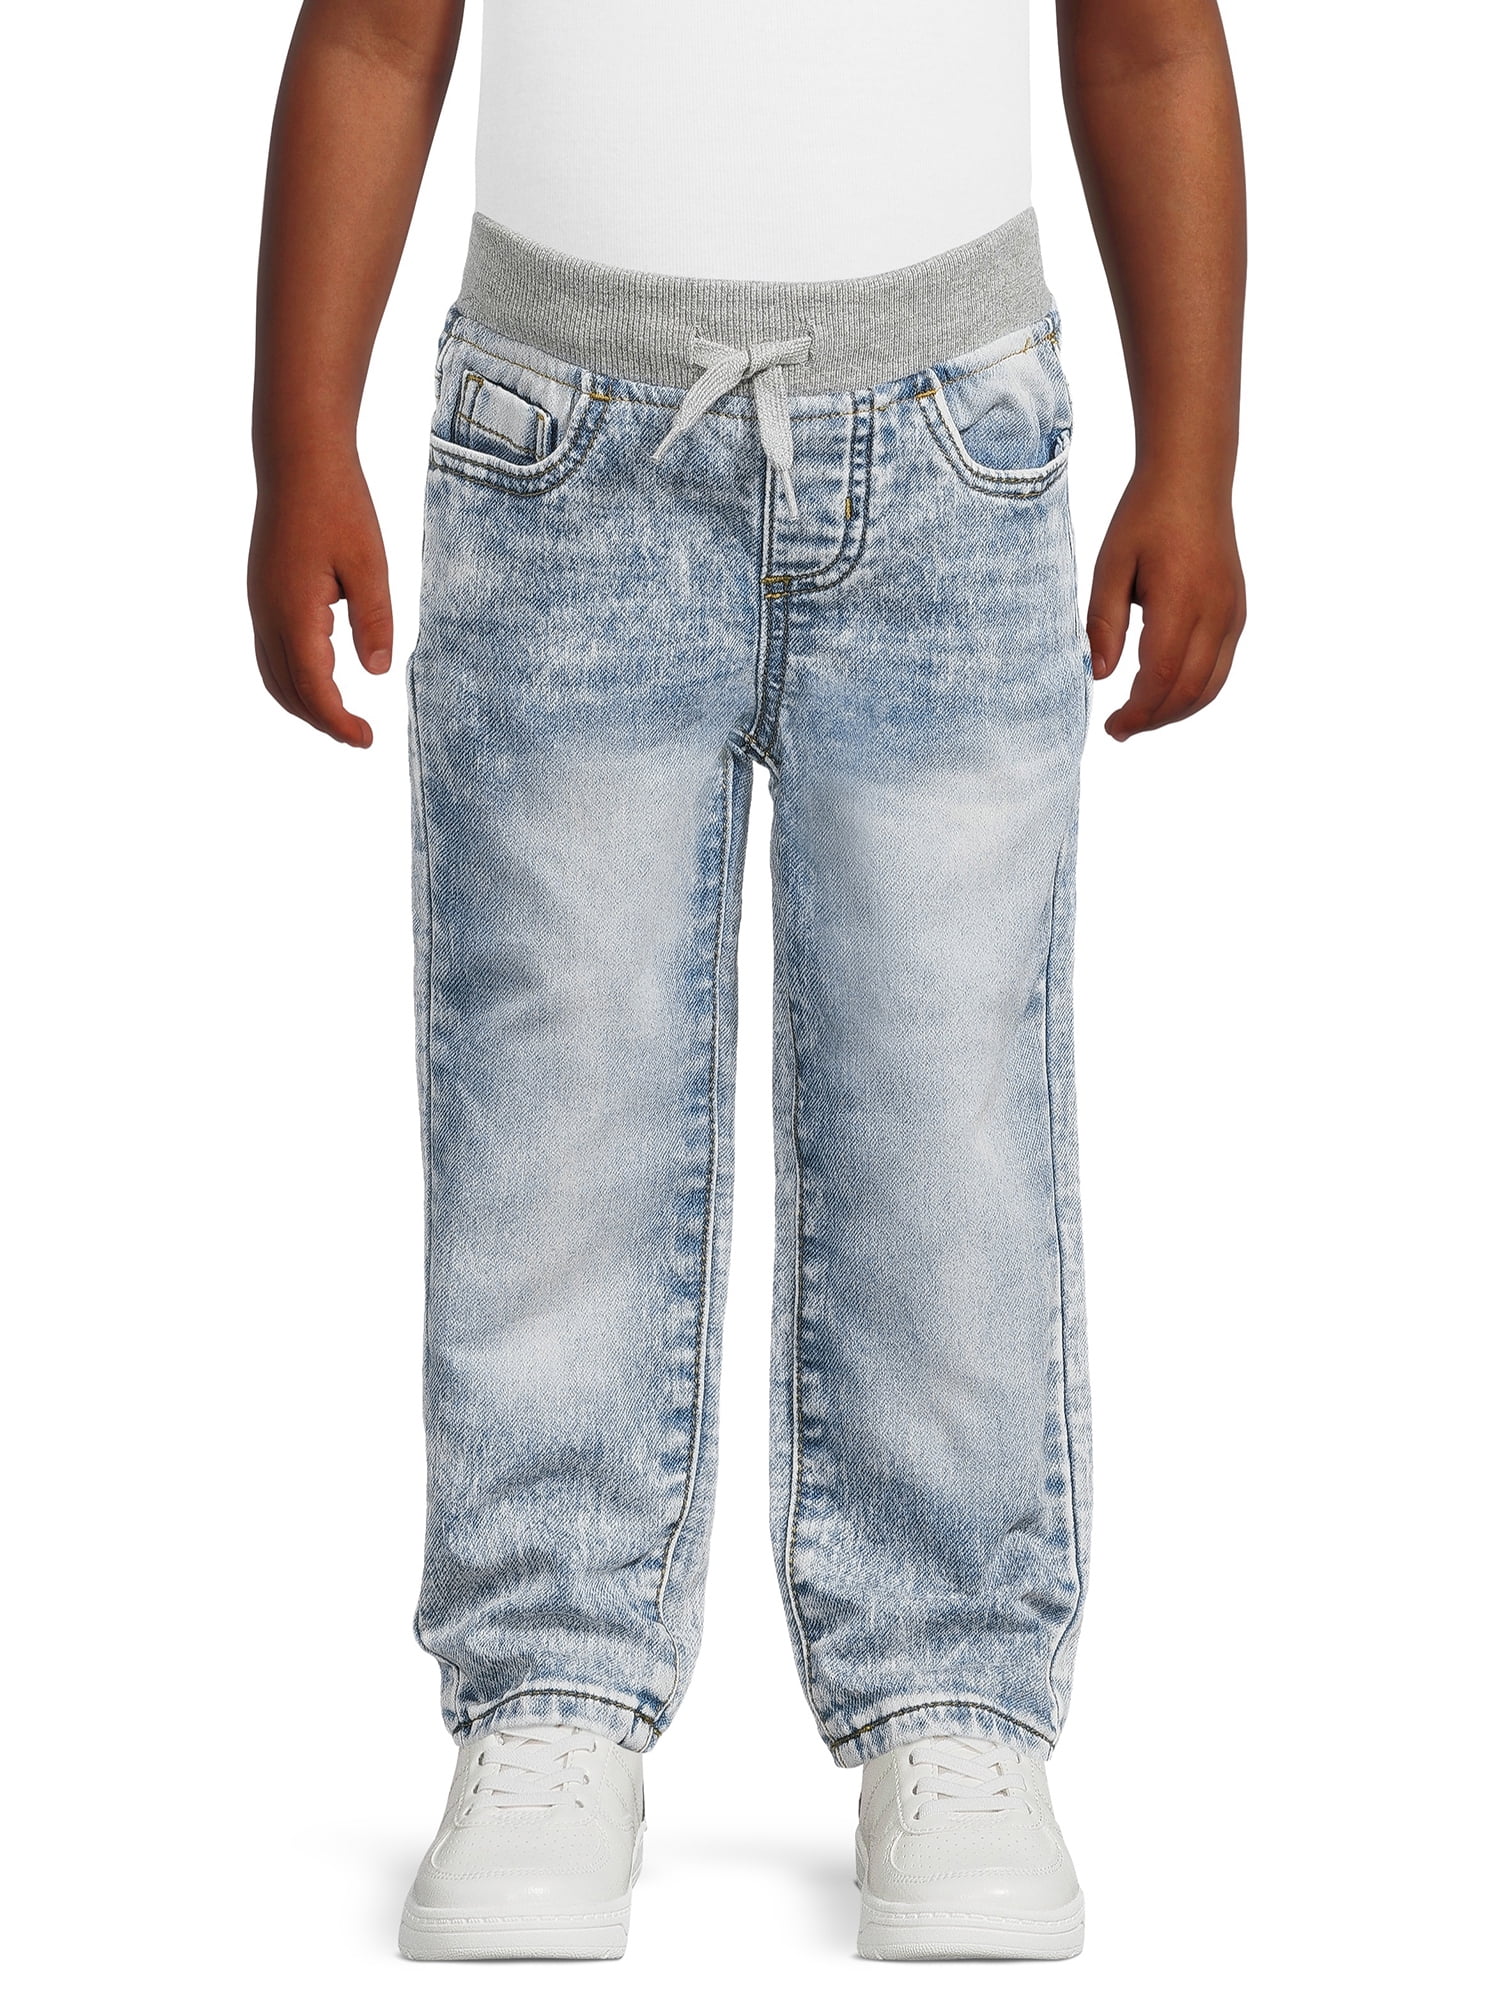 Wonder Nation Baby and Toddler Boys\' Knit Denim Jeans, Sizes 12M-5T